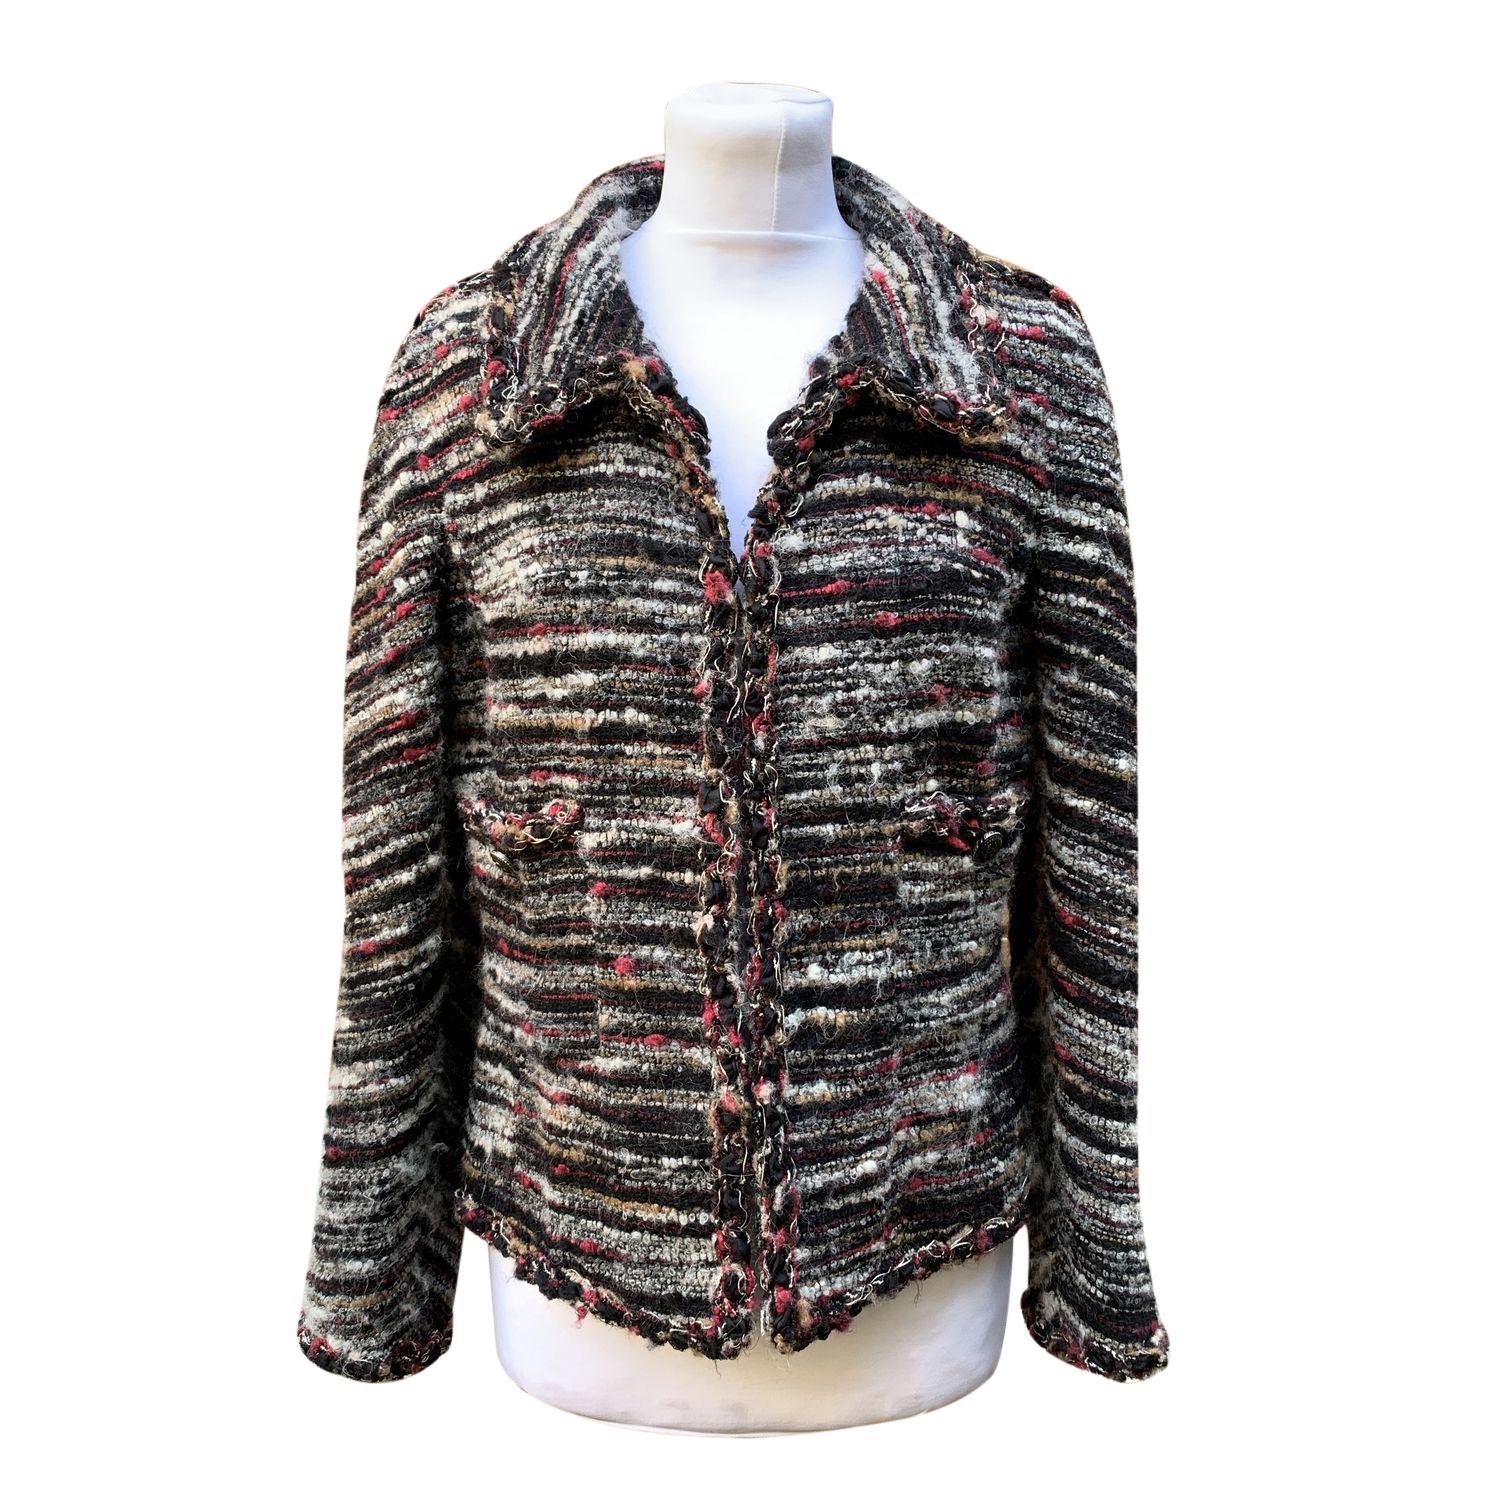 Chanel jacket cardigan Cardigan from the 2011 Fall/Winter 'Paris - Byzance' Collection. Black with multicolored bouclé pattern. Single hook and eye closure. 2 front pockets with CC logo buttons. Signature chain along the hem. Made in France.